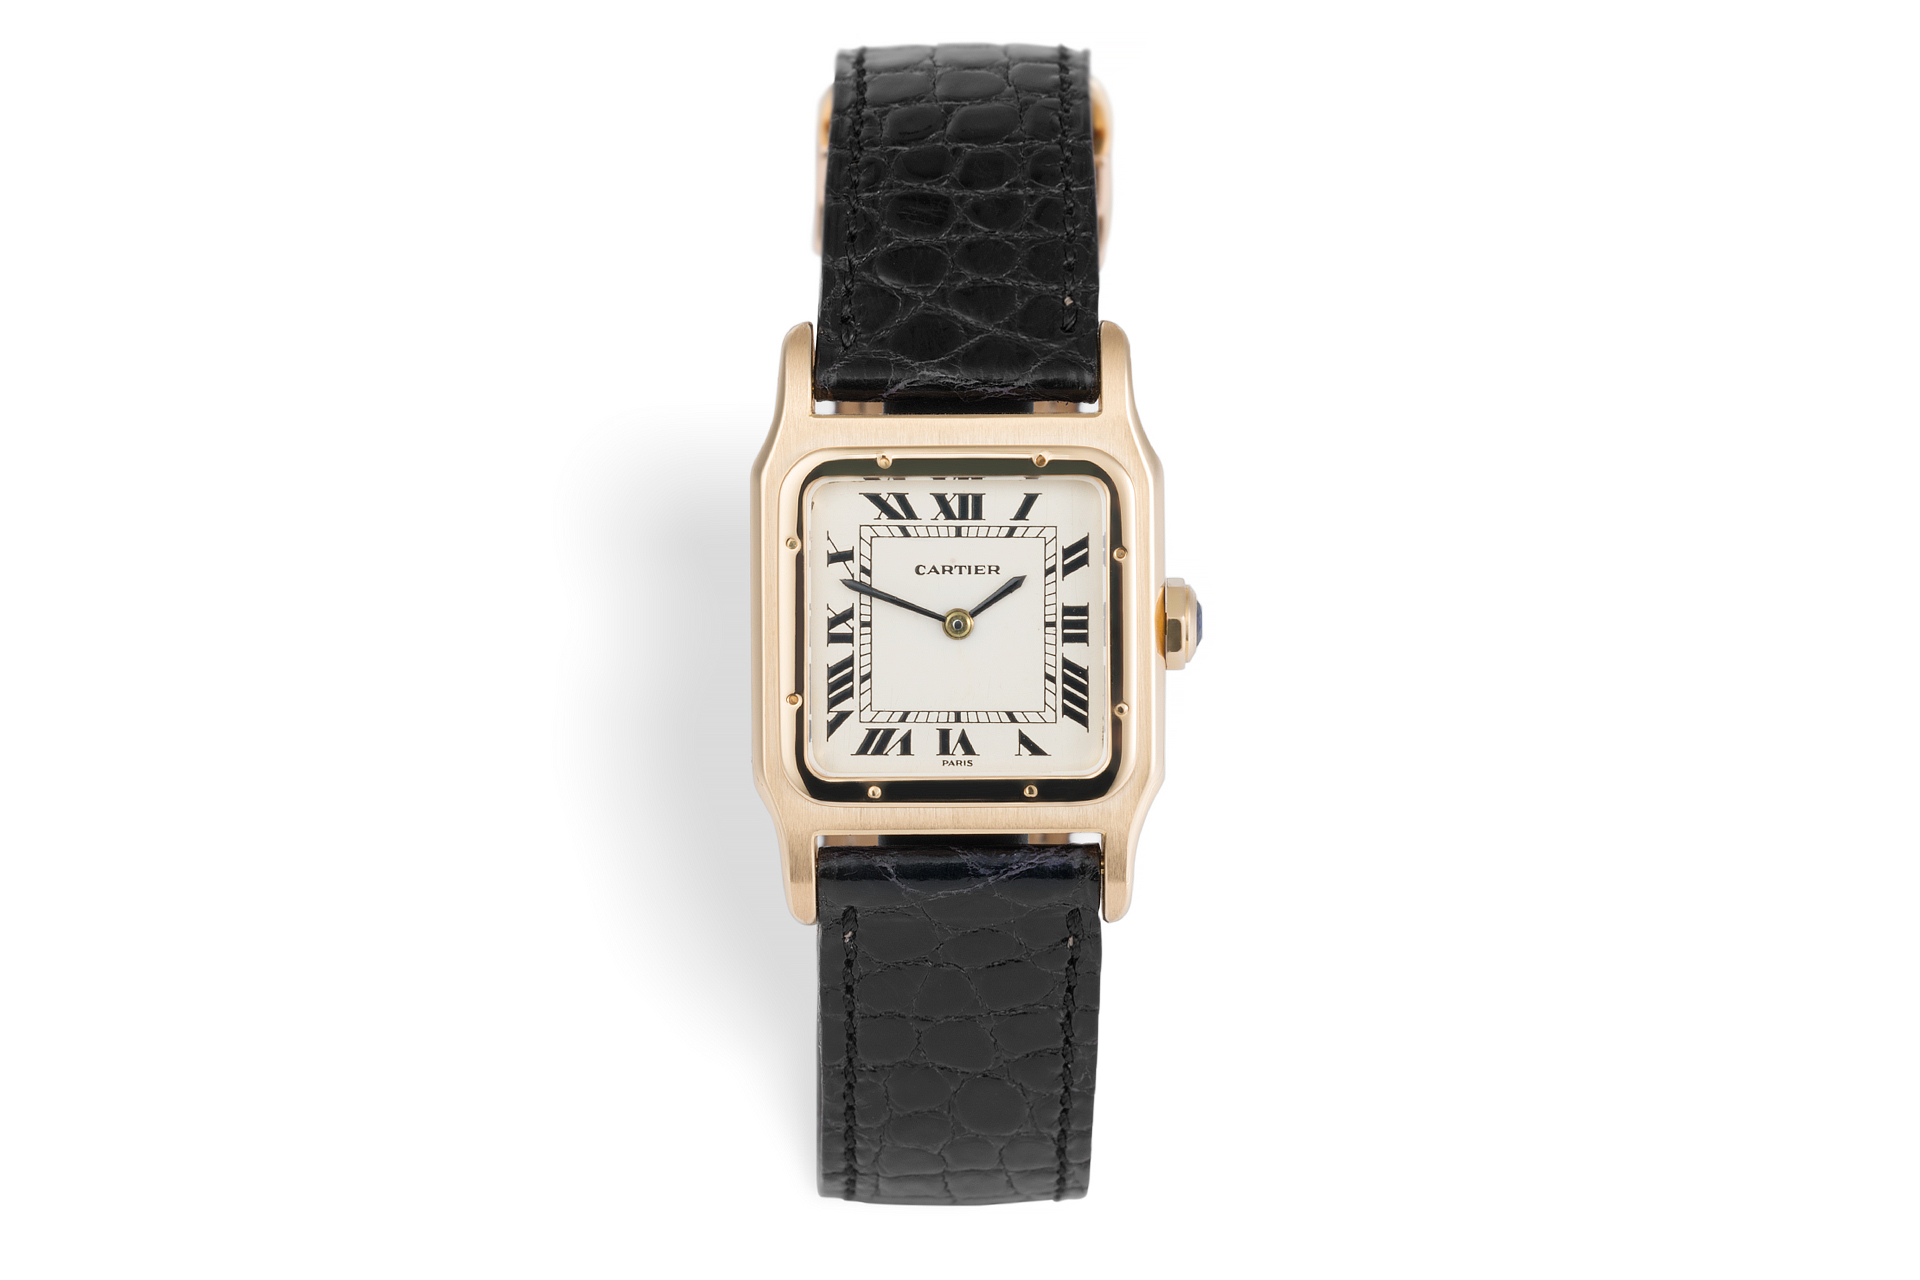 Cartier Santos Dumont Watches 18ct Yellow Gold Vintage Model The Watch Club